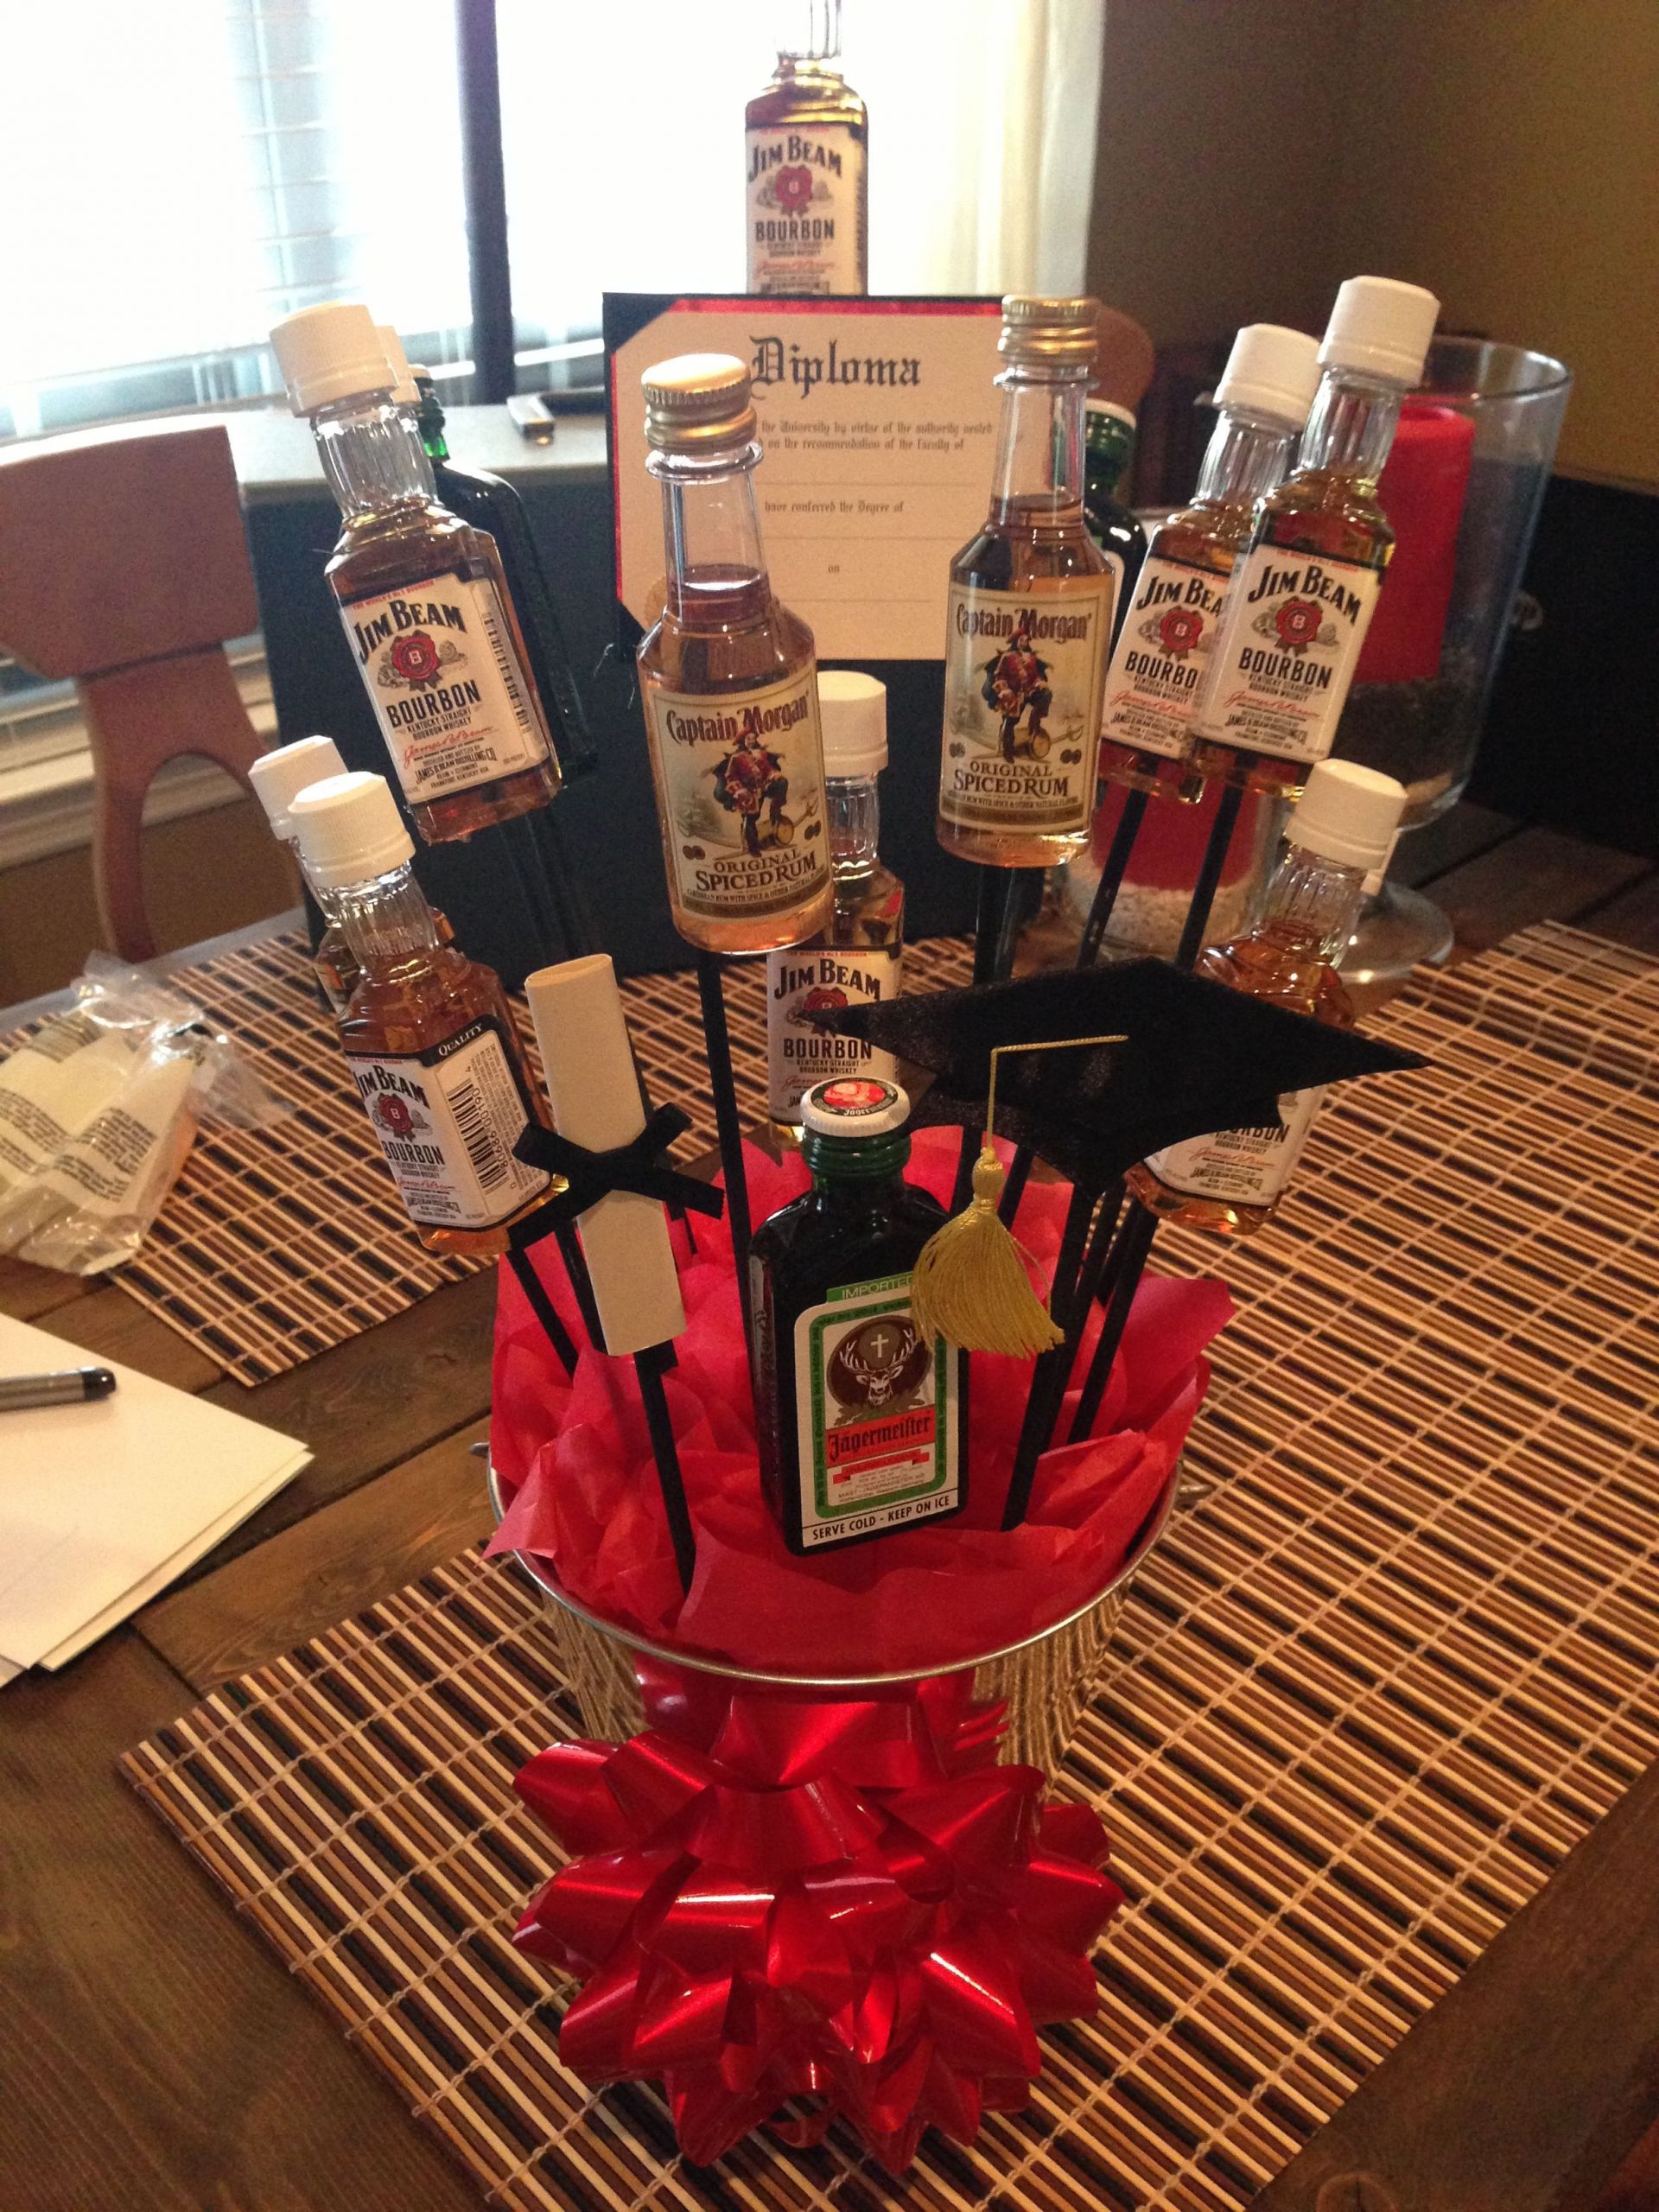 Graduation Gift Ideas For Male College Graduates
 Alcohol bouquet for a guy graduating college